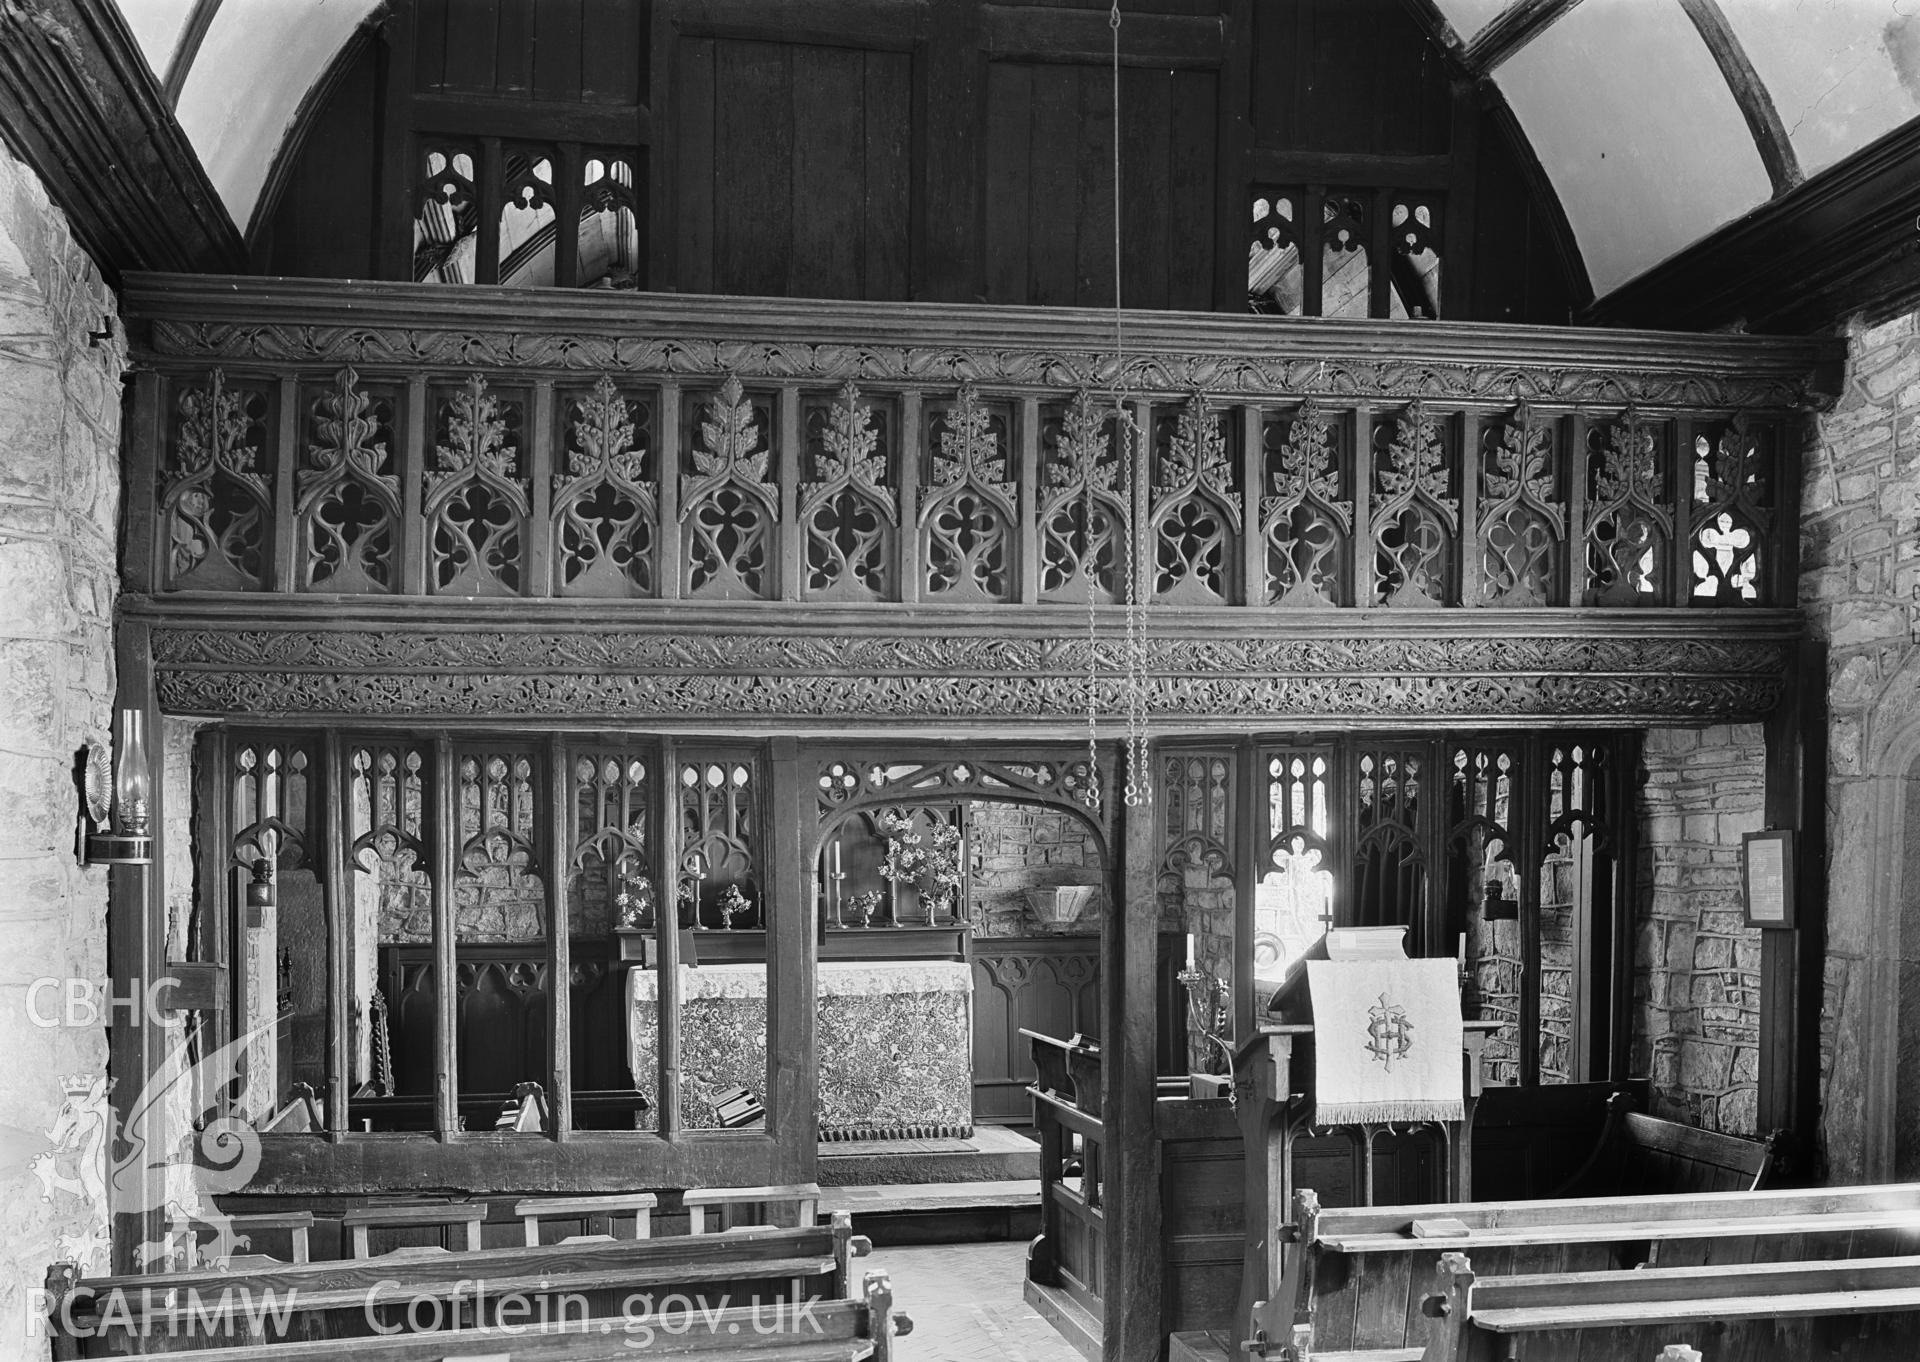 Interior view of Bettws Newydd Church showing rood screen.